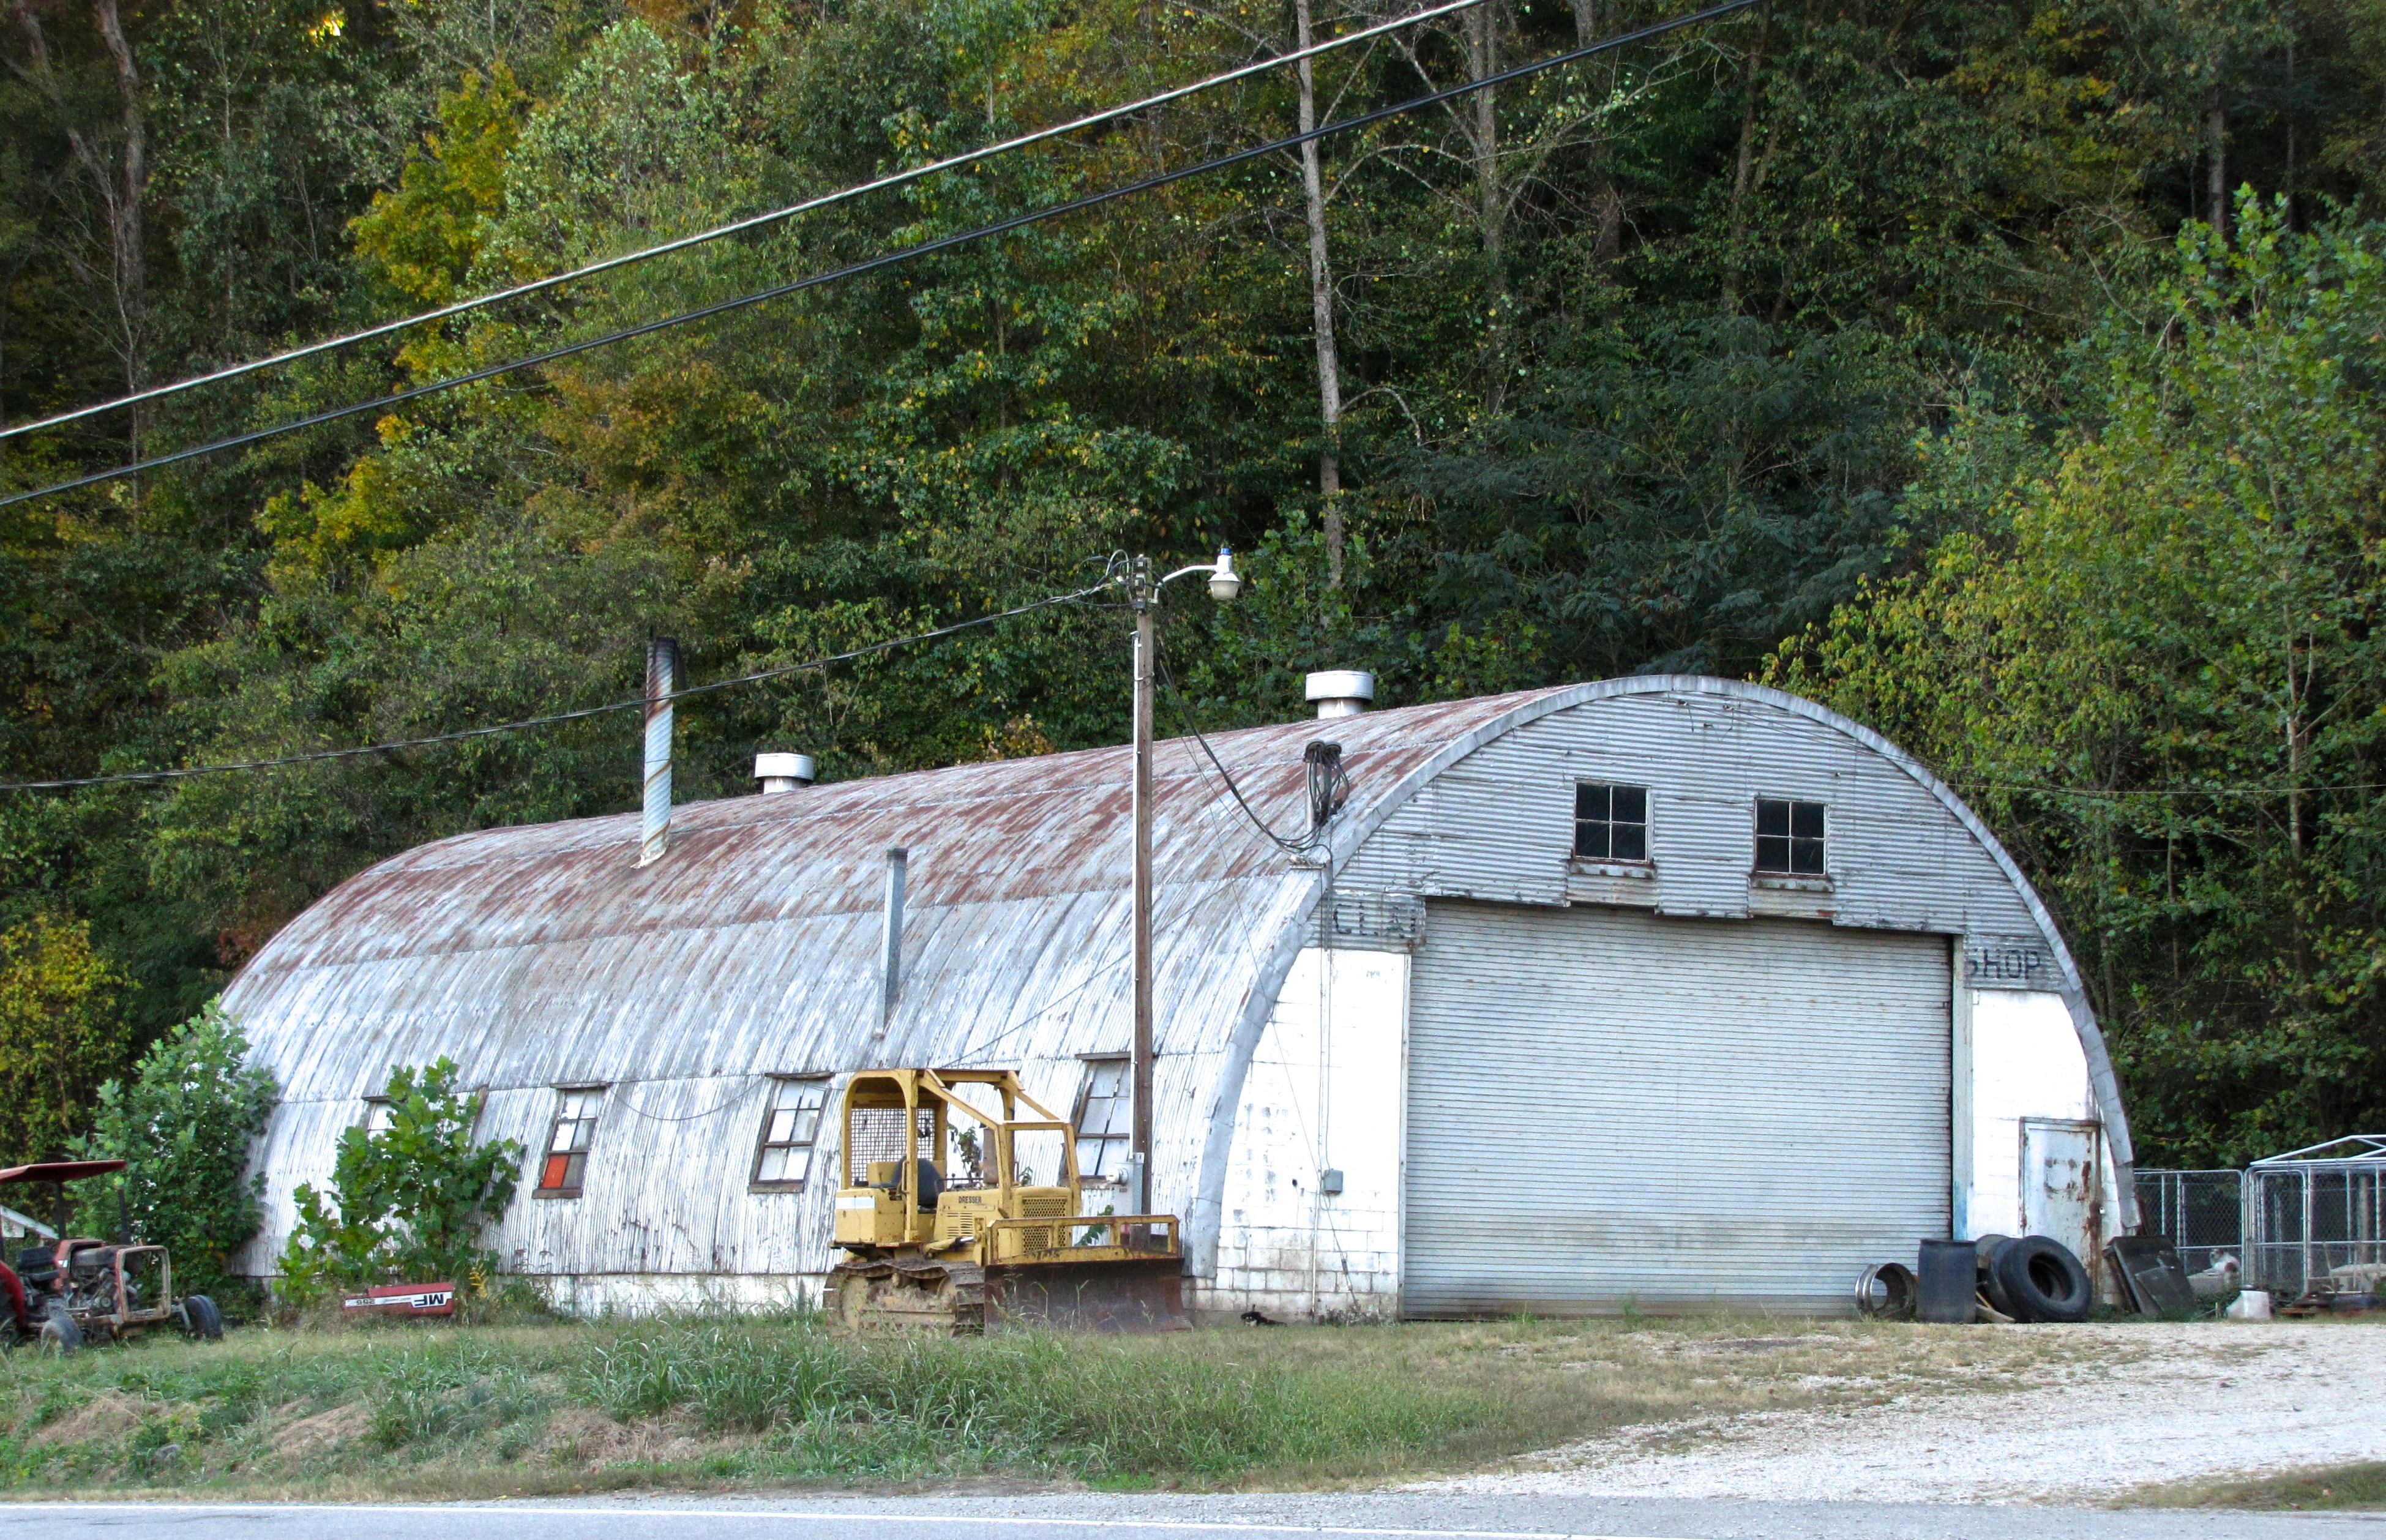 quonset hut in Dillon, SC